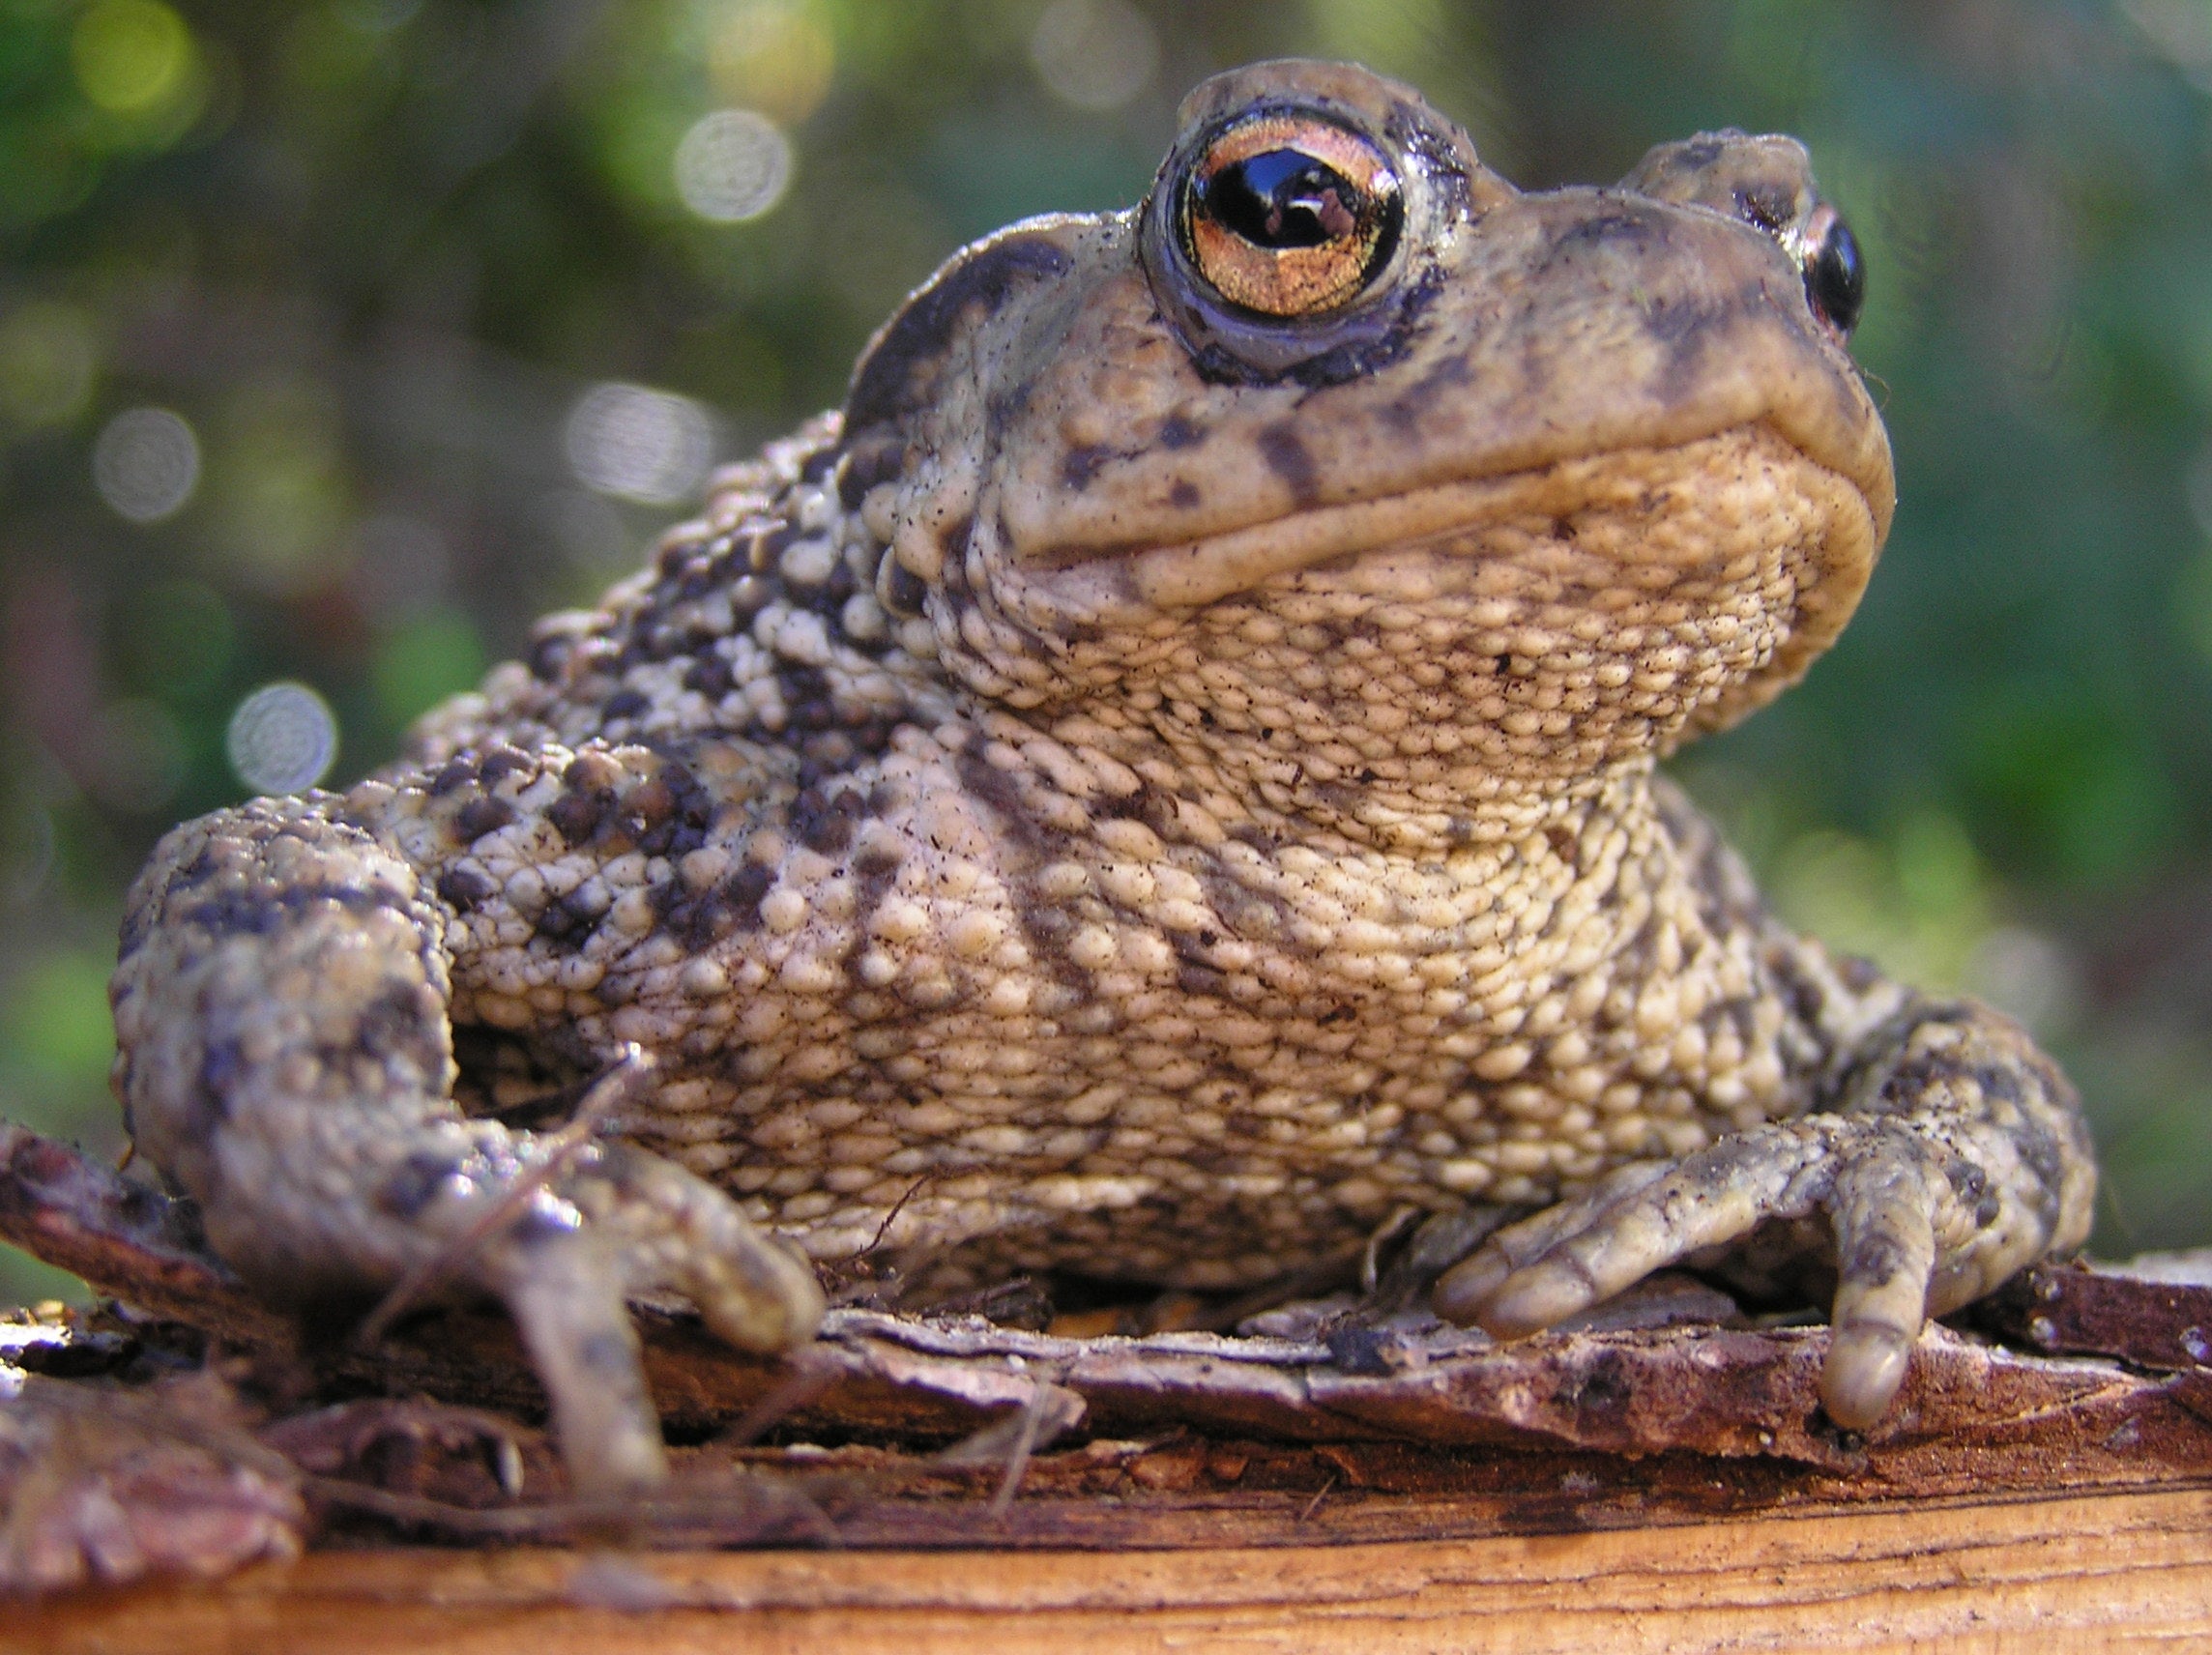 Toads were found living in trees (Froglife/PA)